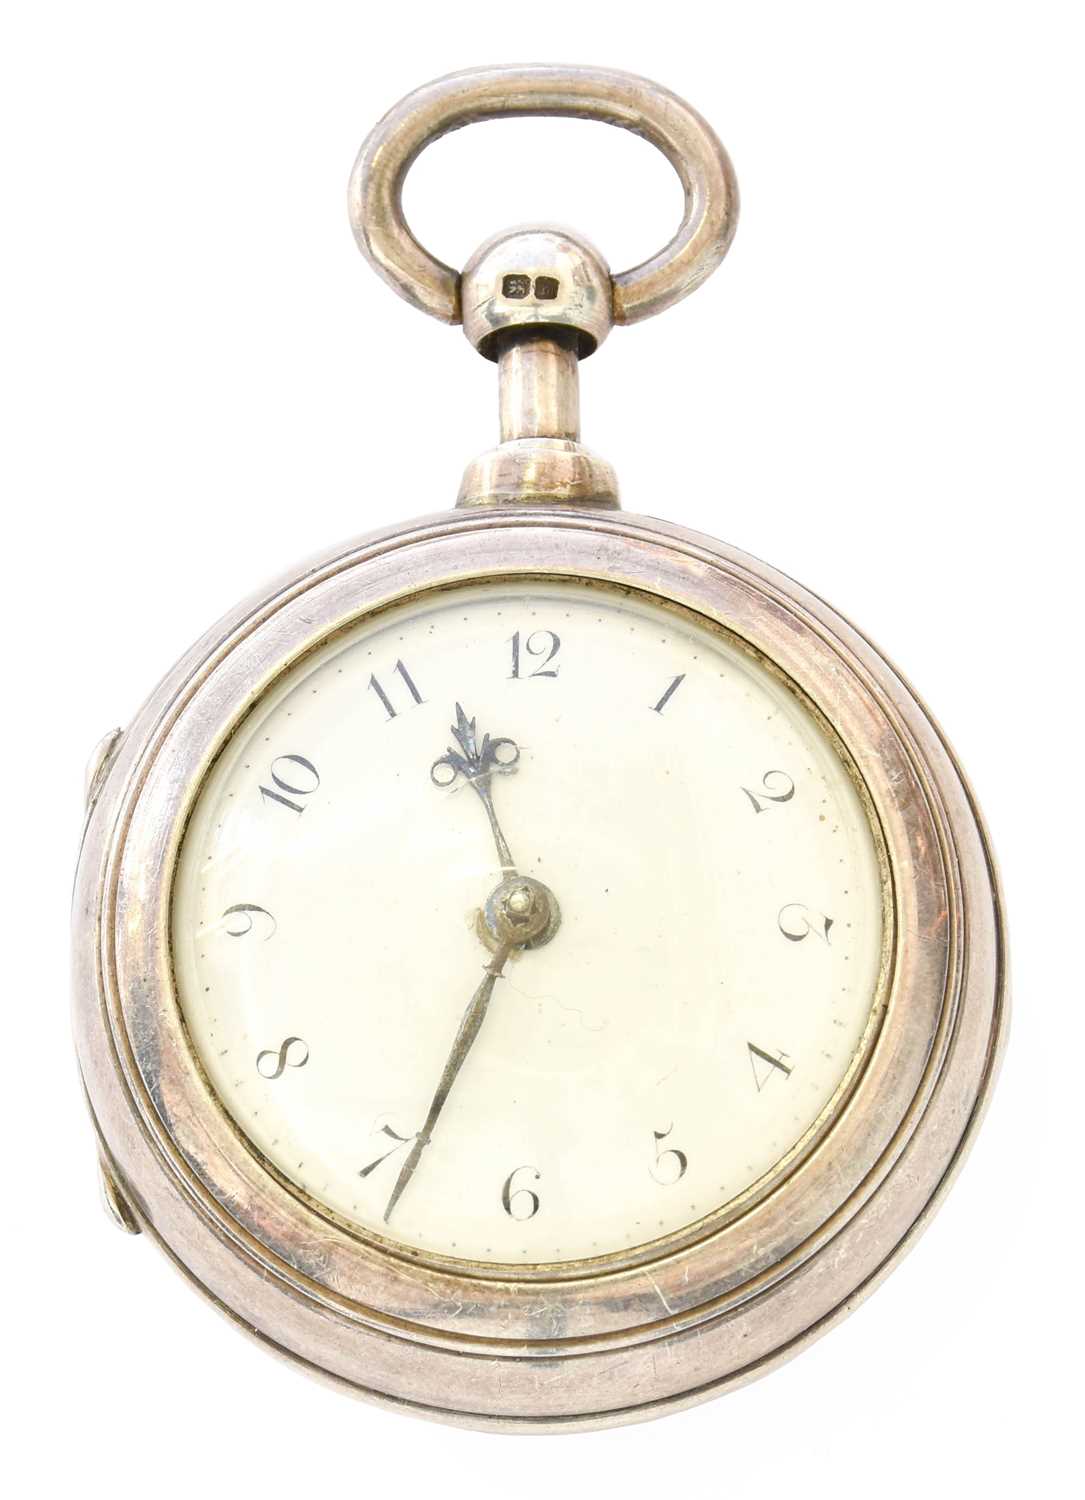 A Pair Cased Verge Repeater Pocket Watch, signed Jno Kentish, London, fusee verge movement signed,